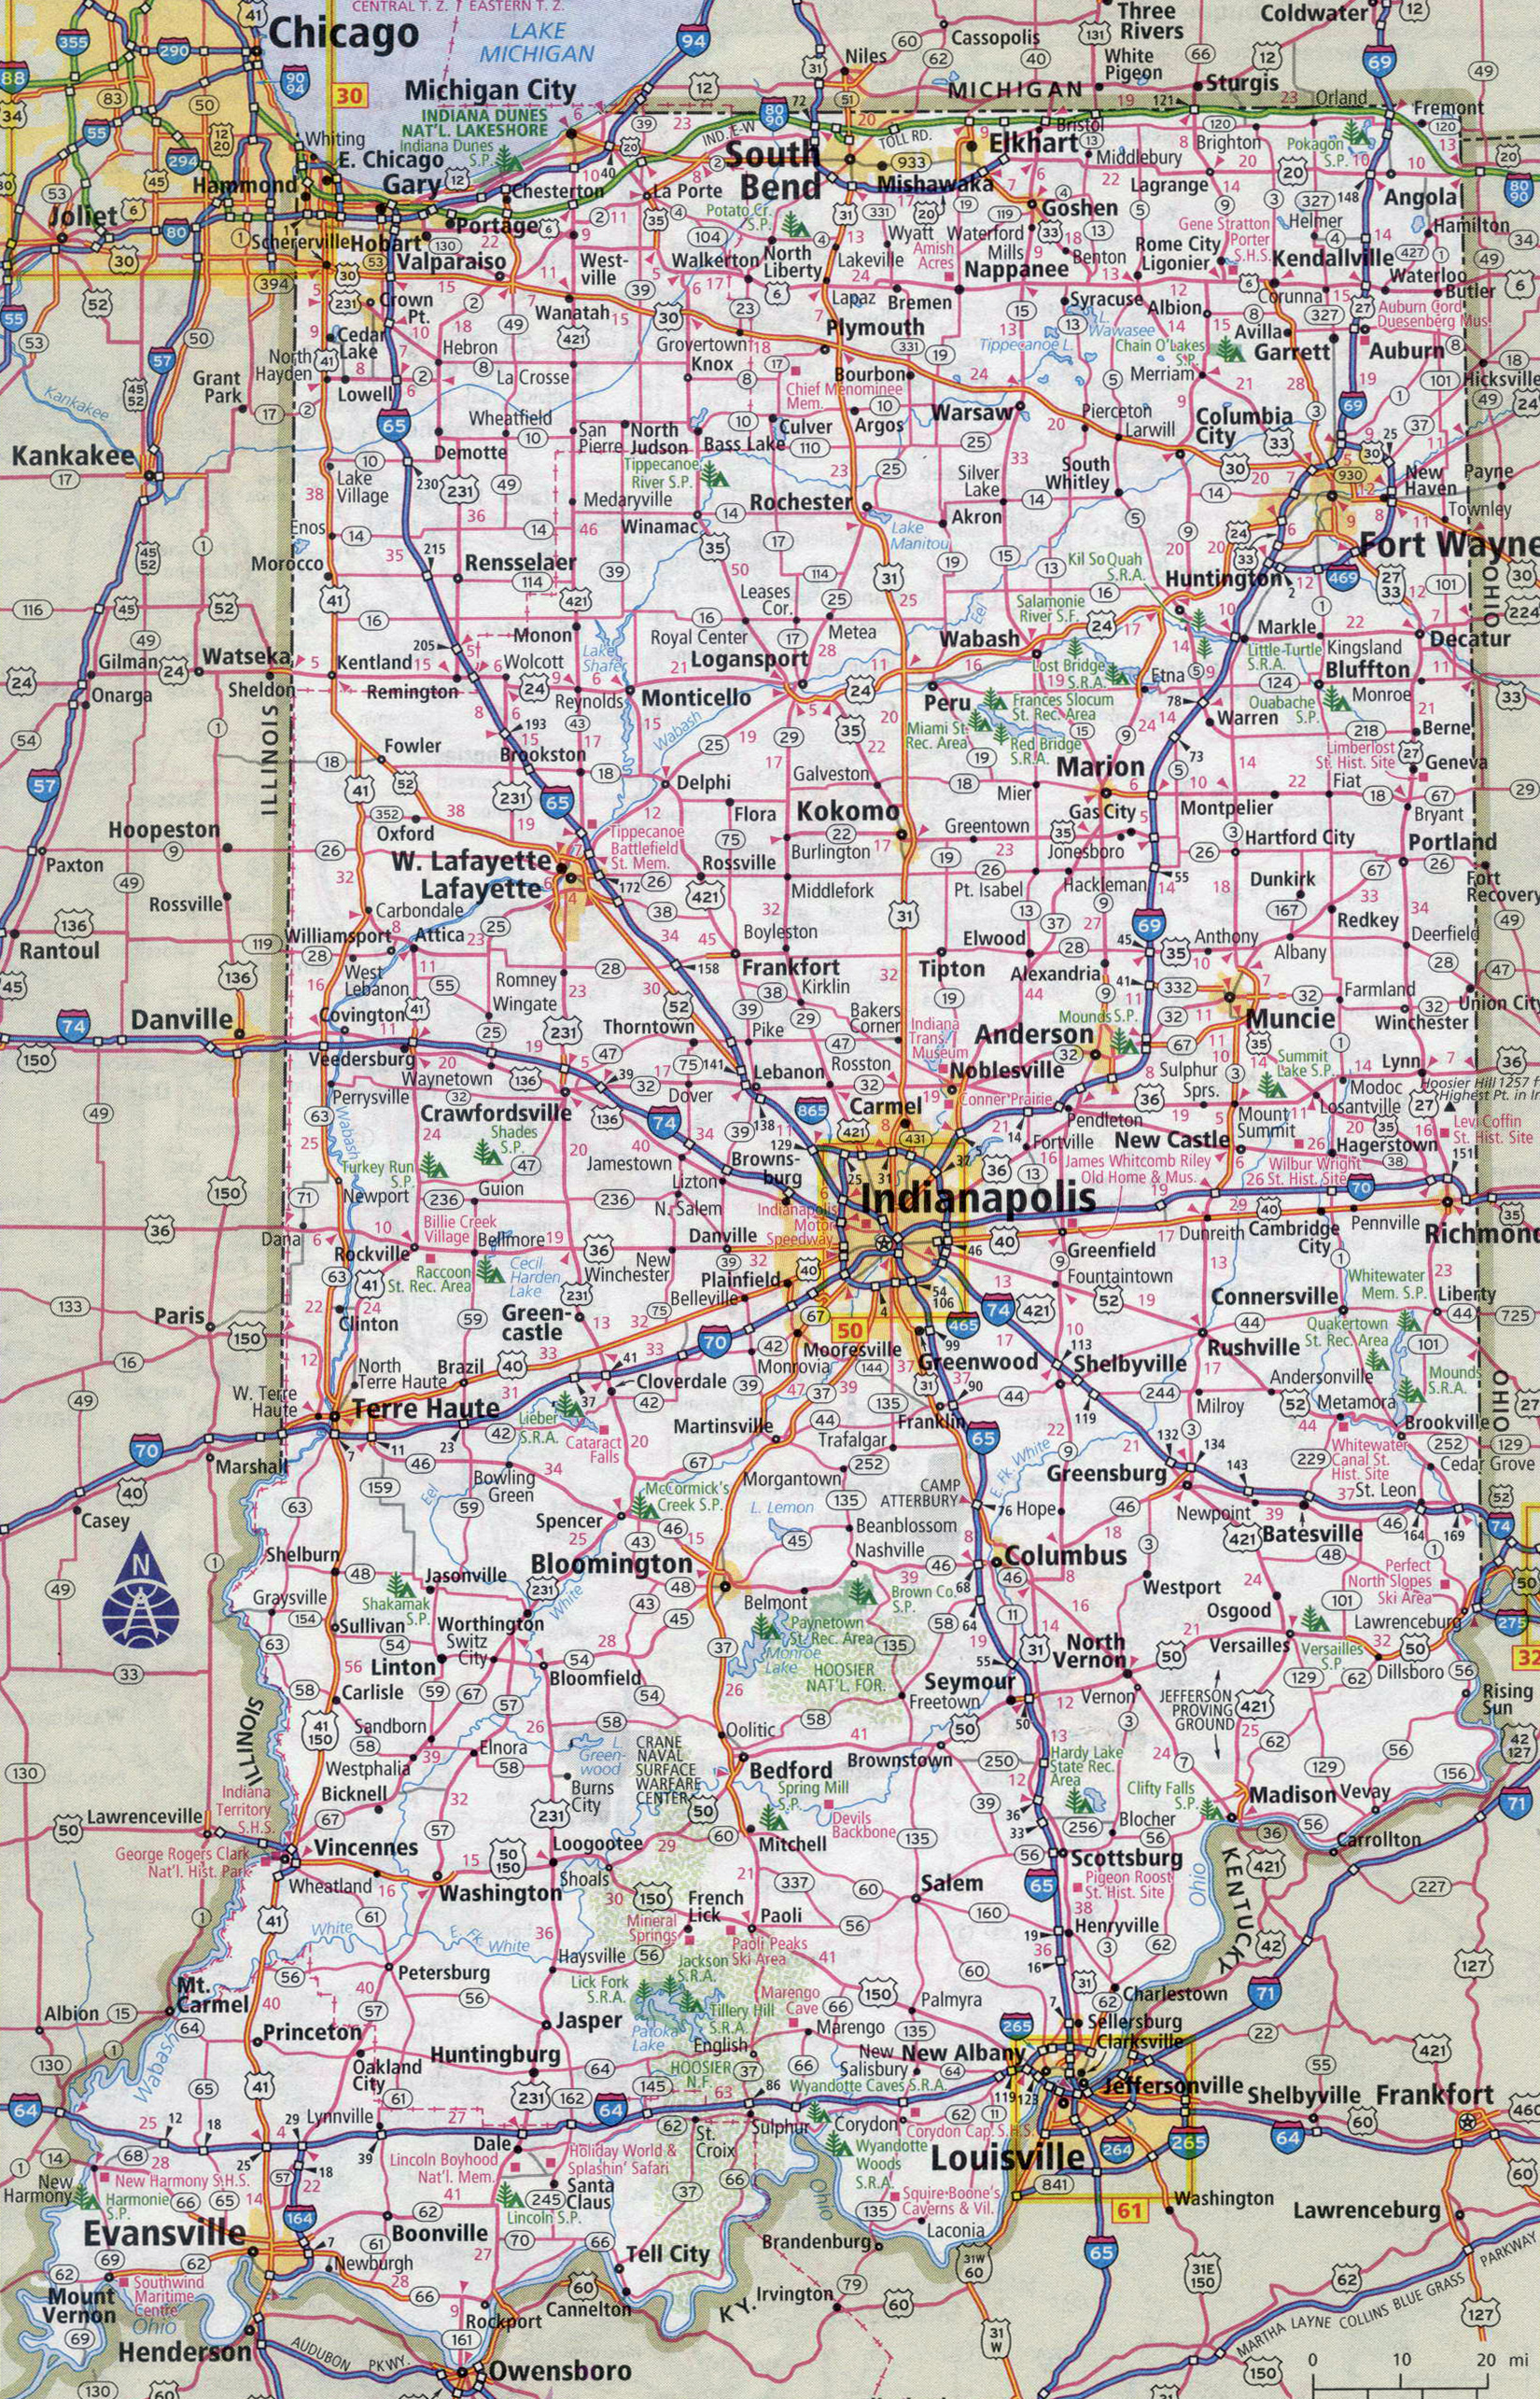 Indiana Road Map 2020 Large Detailed Roads And Highways Map Of Indiana State With All Cities |  Indiana State | Usa | Maps Of The Usa | Maps Collection Of The United  States Of America